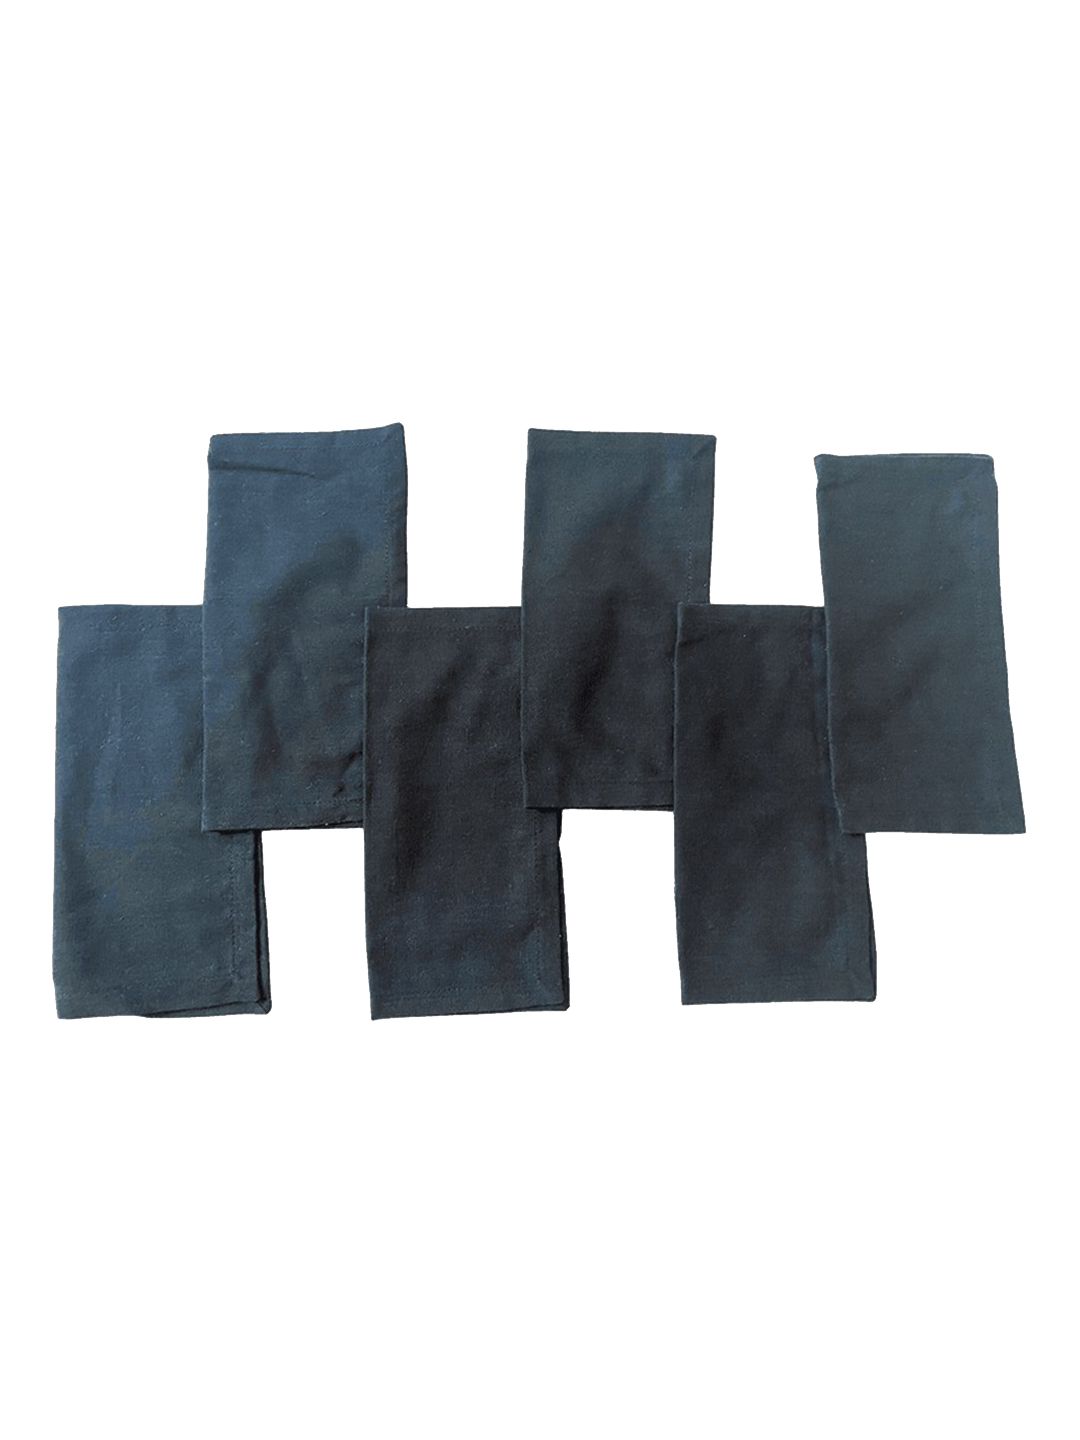 Lushomes Set of 6 Black Solid Cotton Table Napkins Price in India